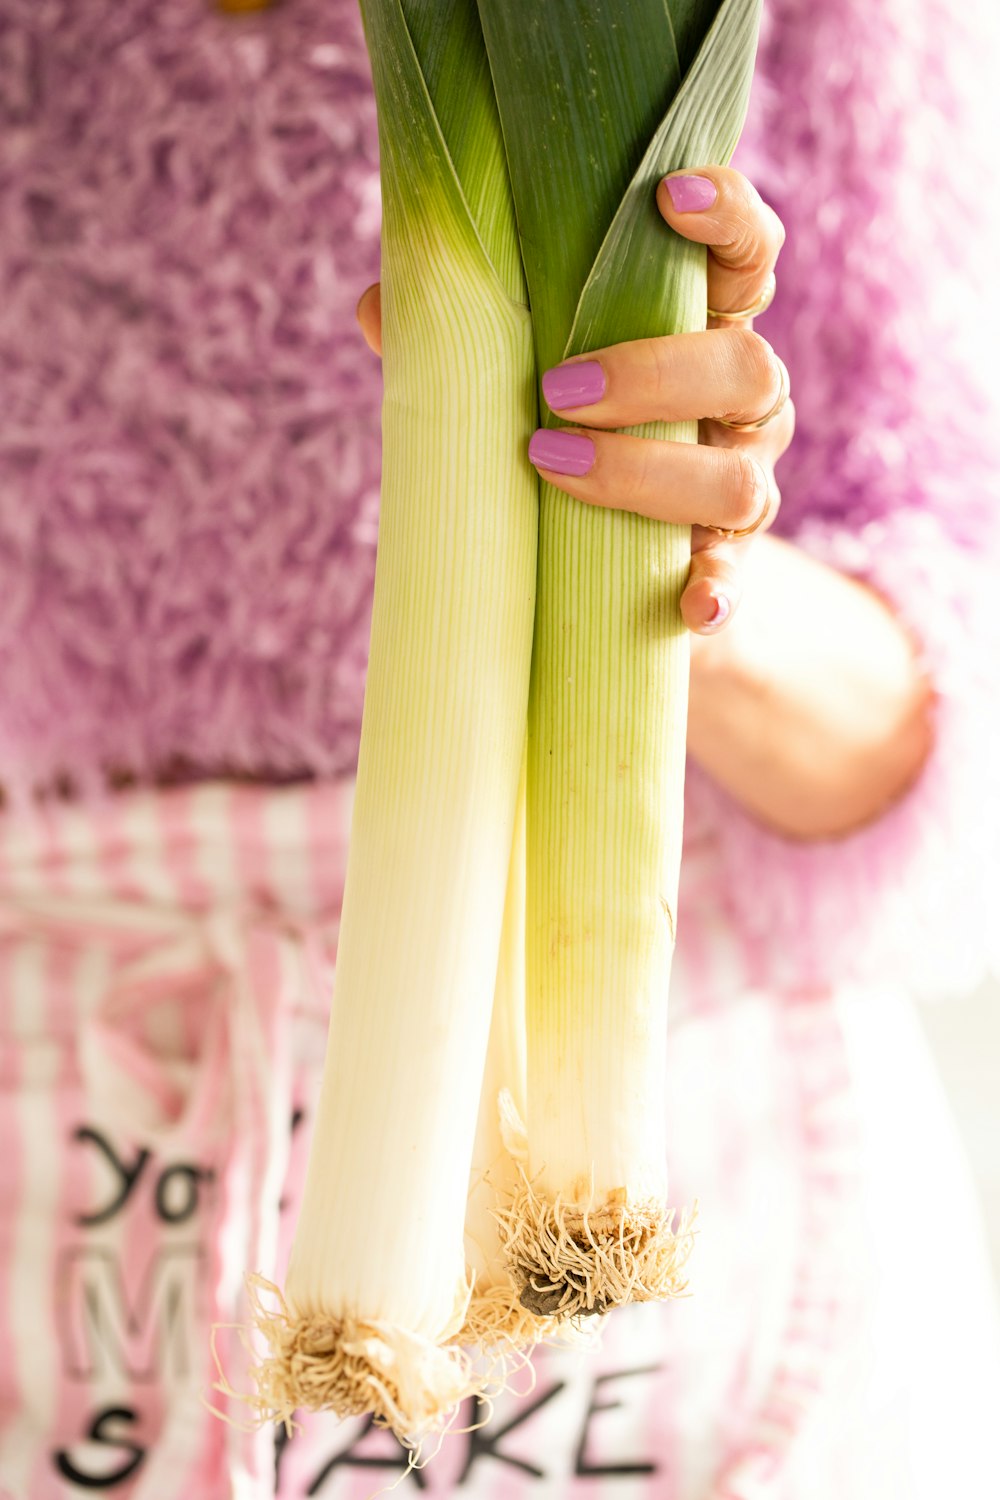 a close up of a person holding a stalk of celery